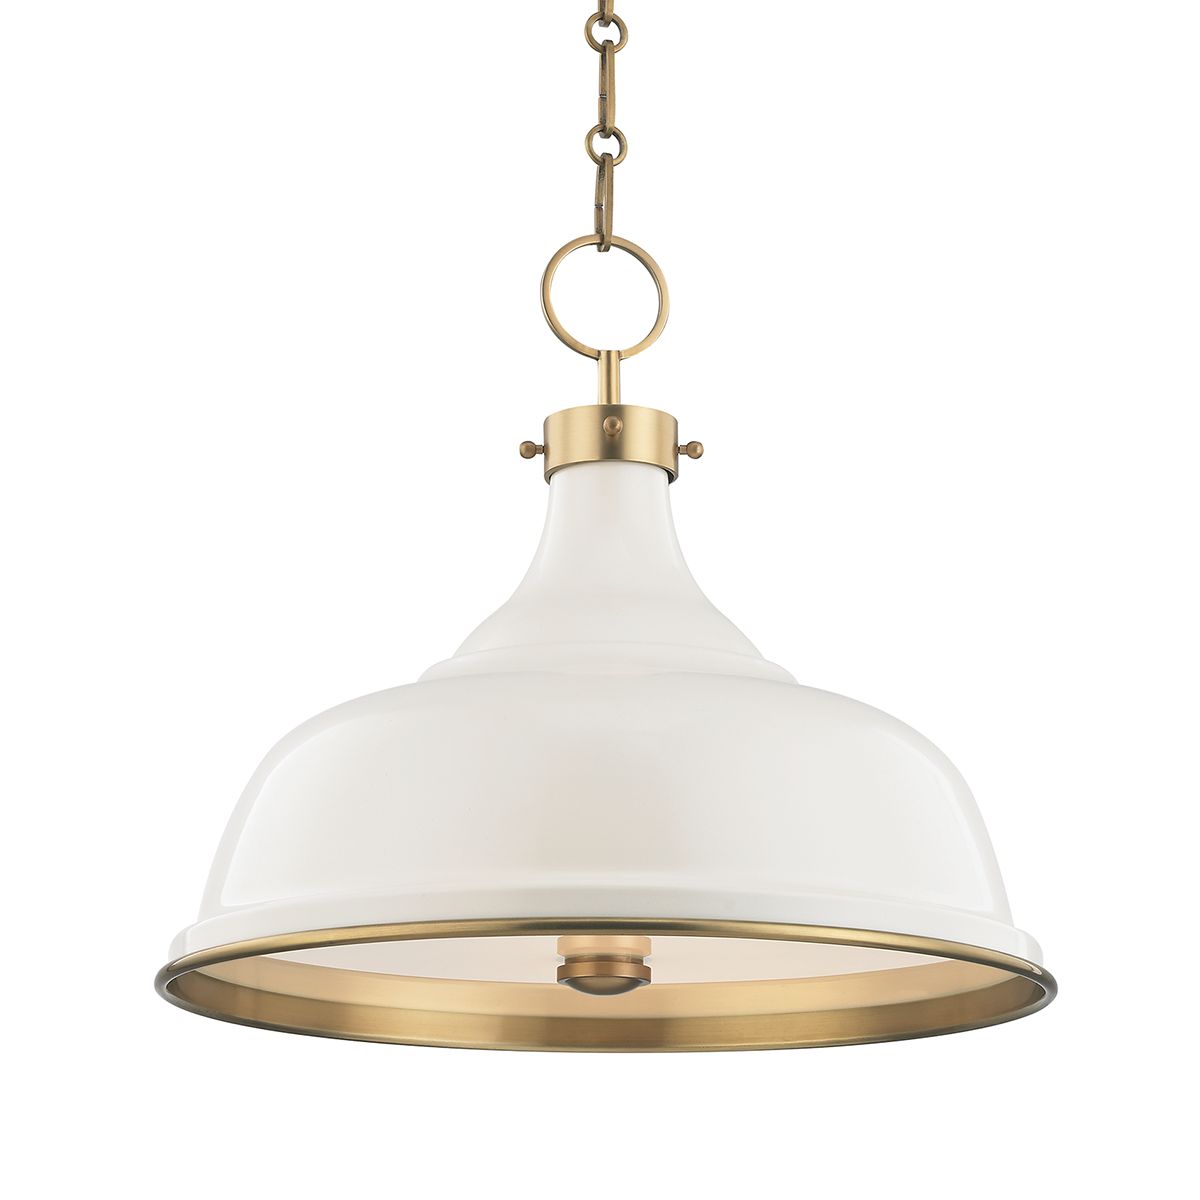 Painted No.1 18 in. 3 Lights Pendant Light